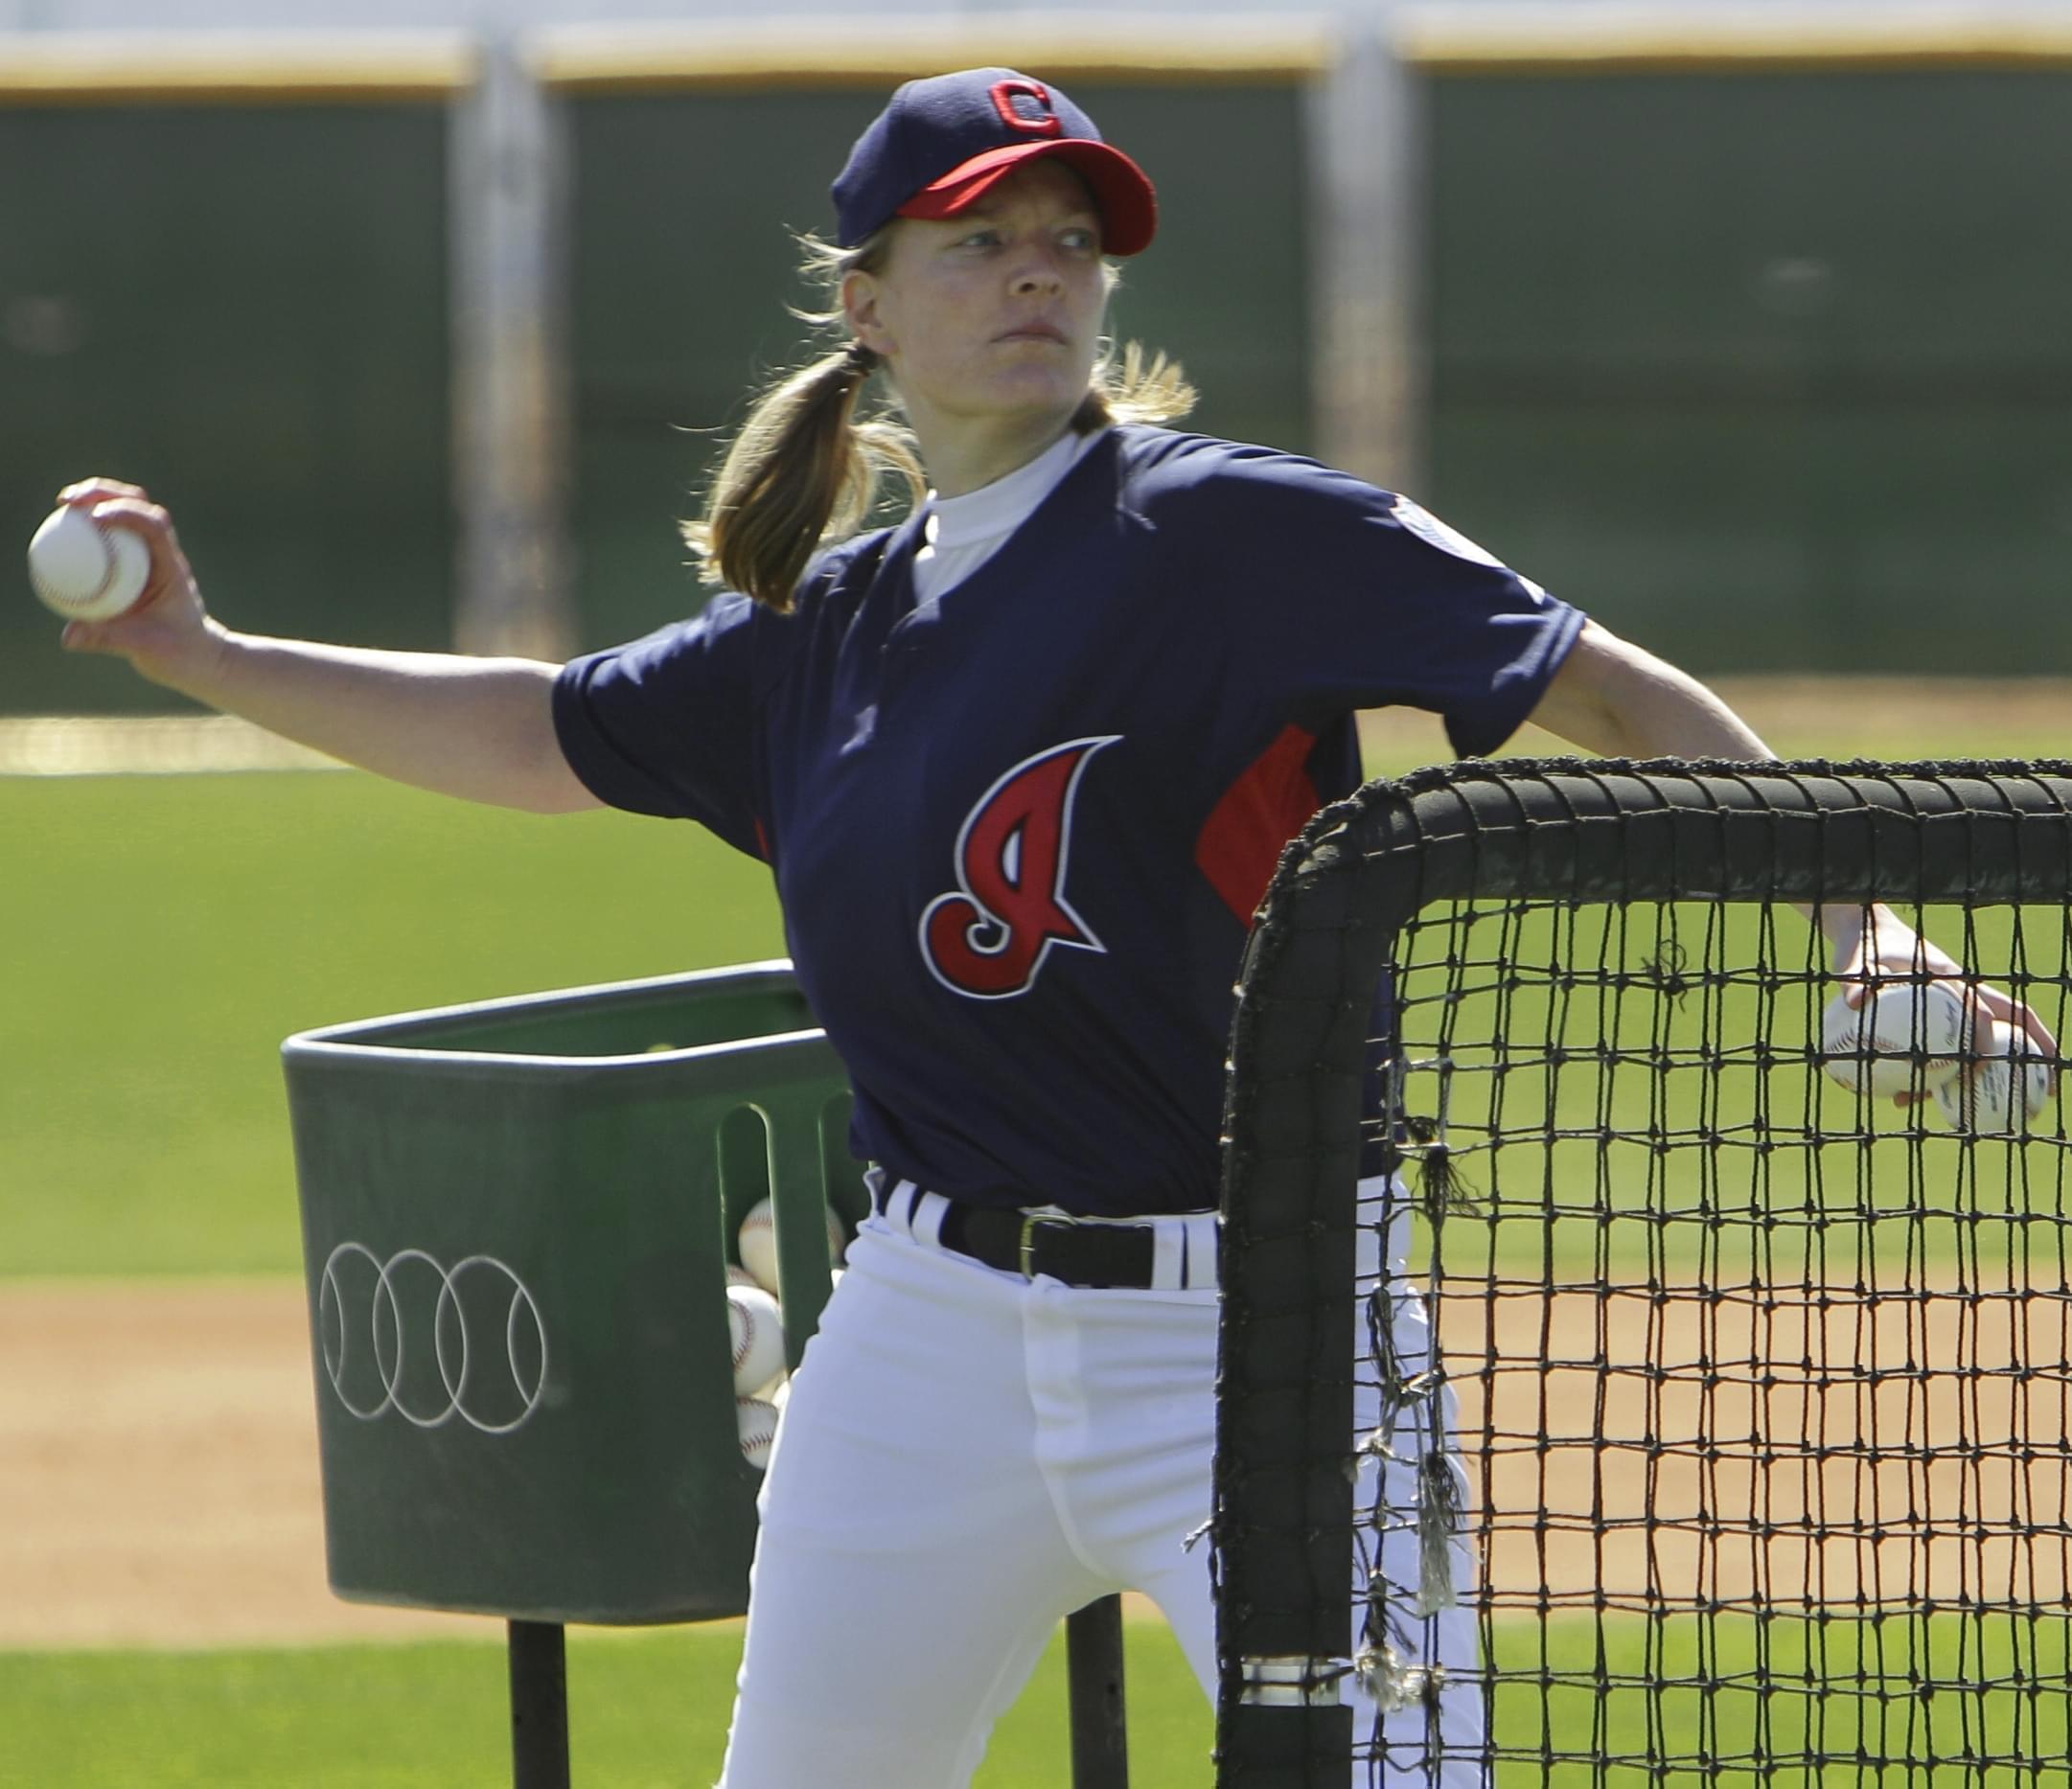 Justine Siegal throws batting practice to Cleveland Indians catchers during baseball spring training Monday, Feb. 21, 2011, in Goodyear, Ariz.